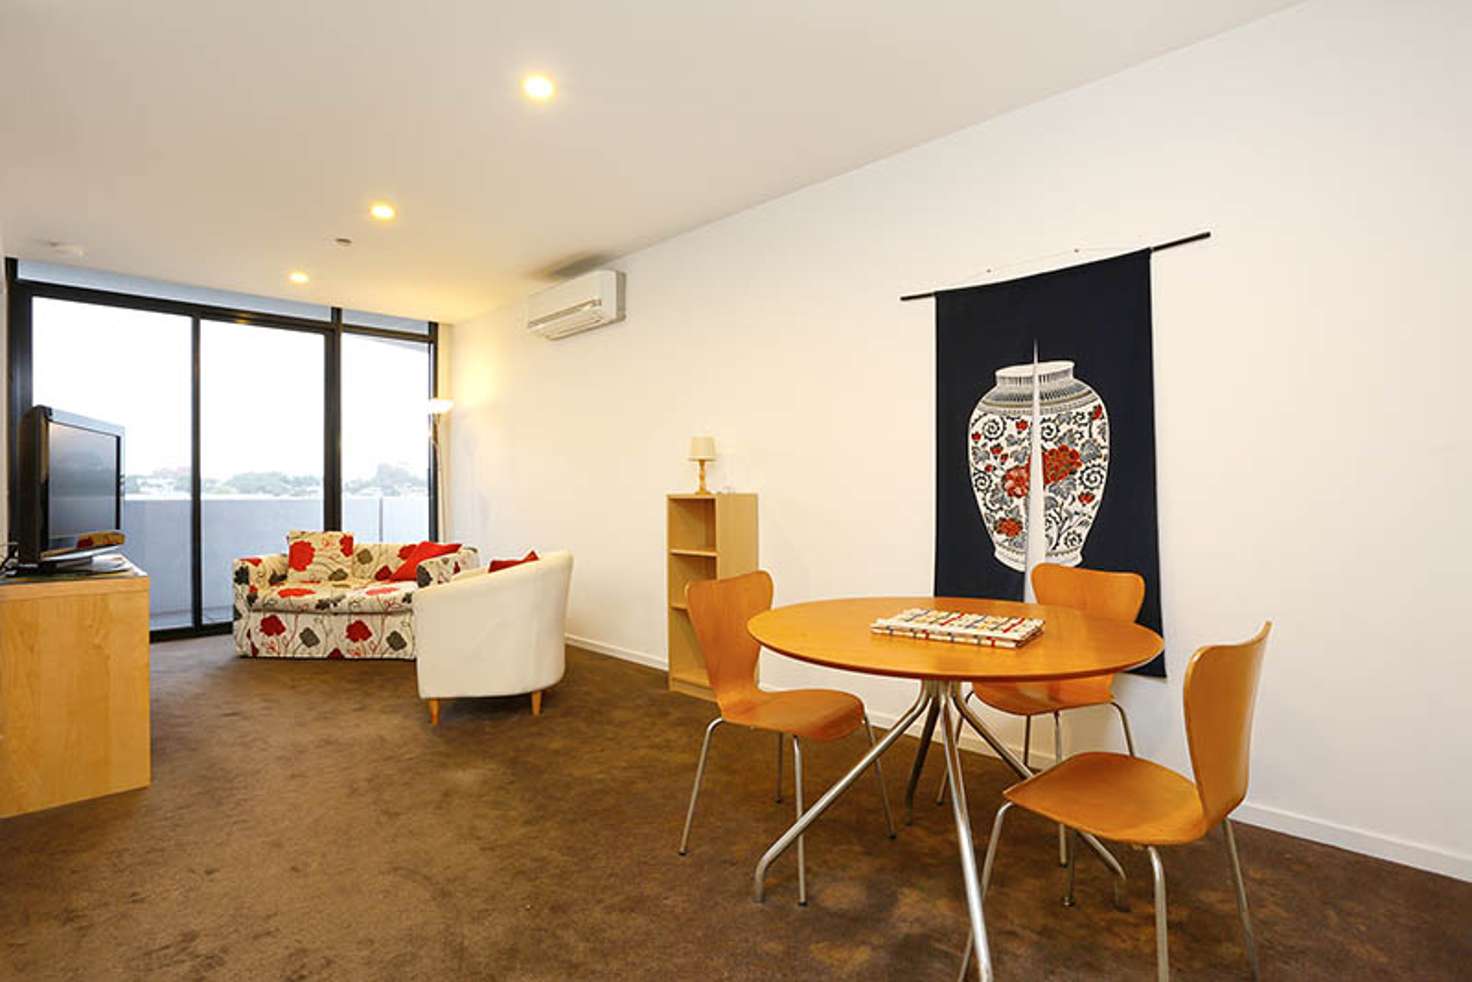 Main view of Homely apartment listing, 632/38 Mt Alexander Rd, Travancore VIC 3032